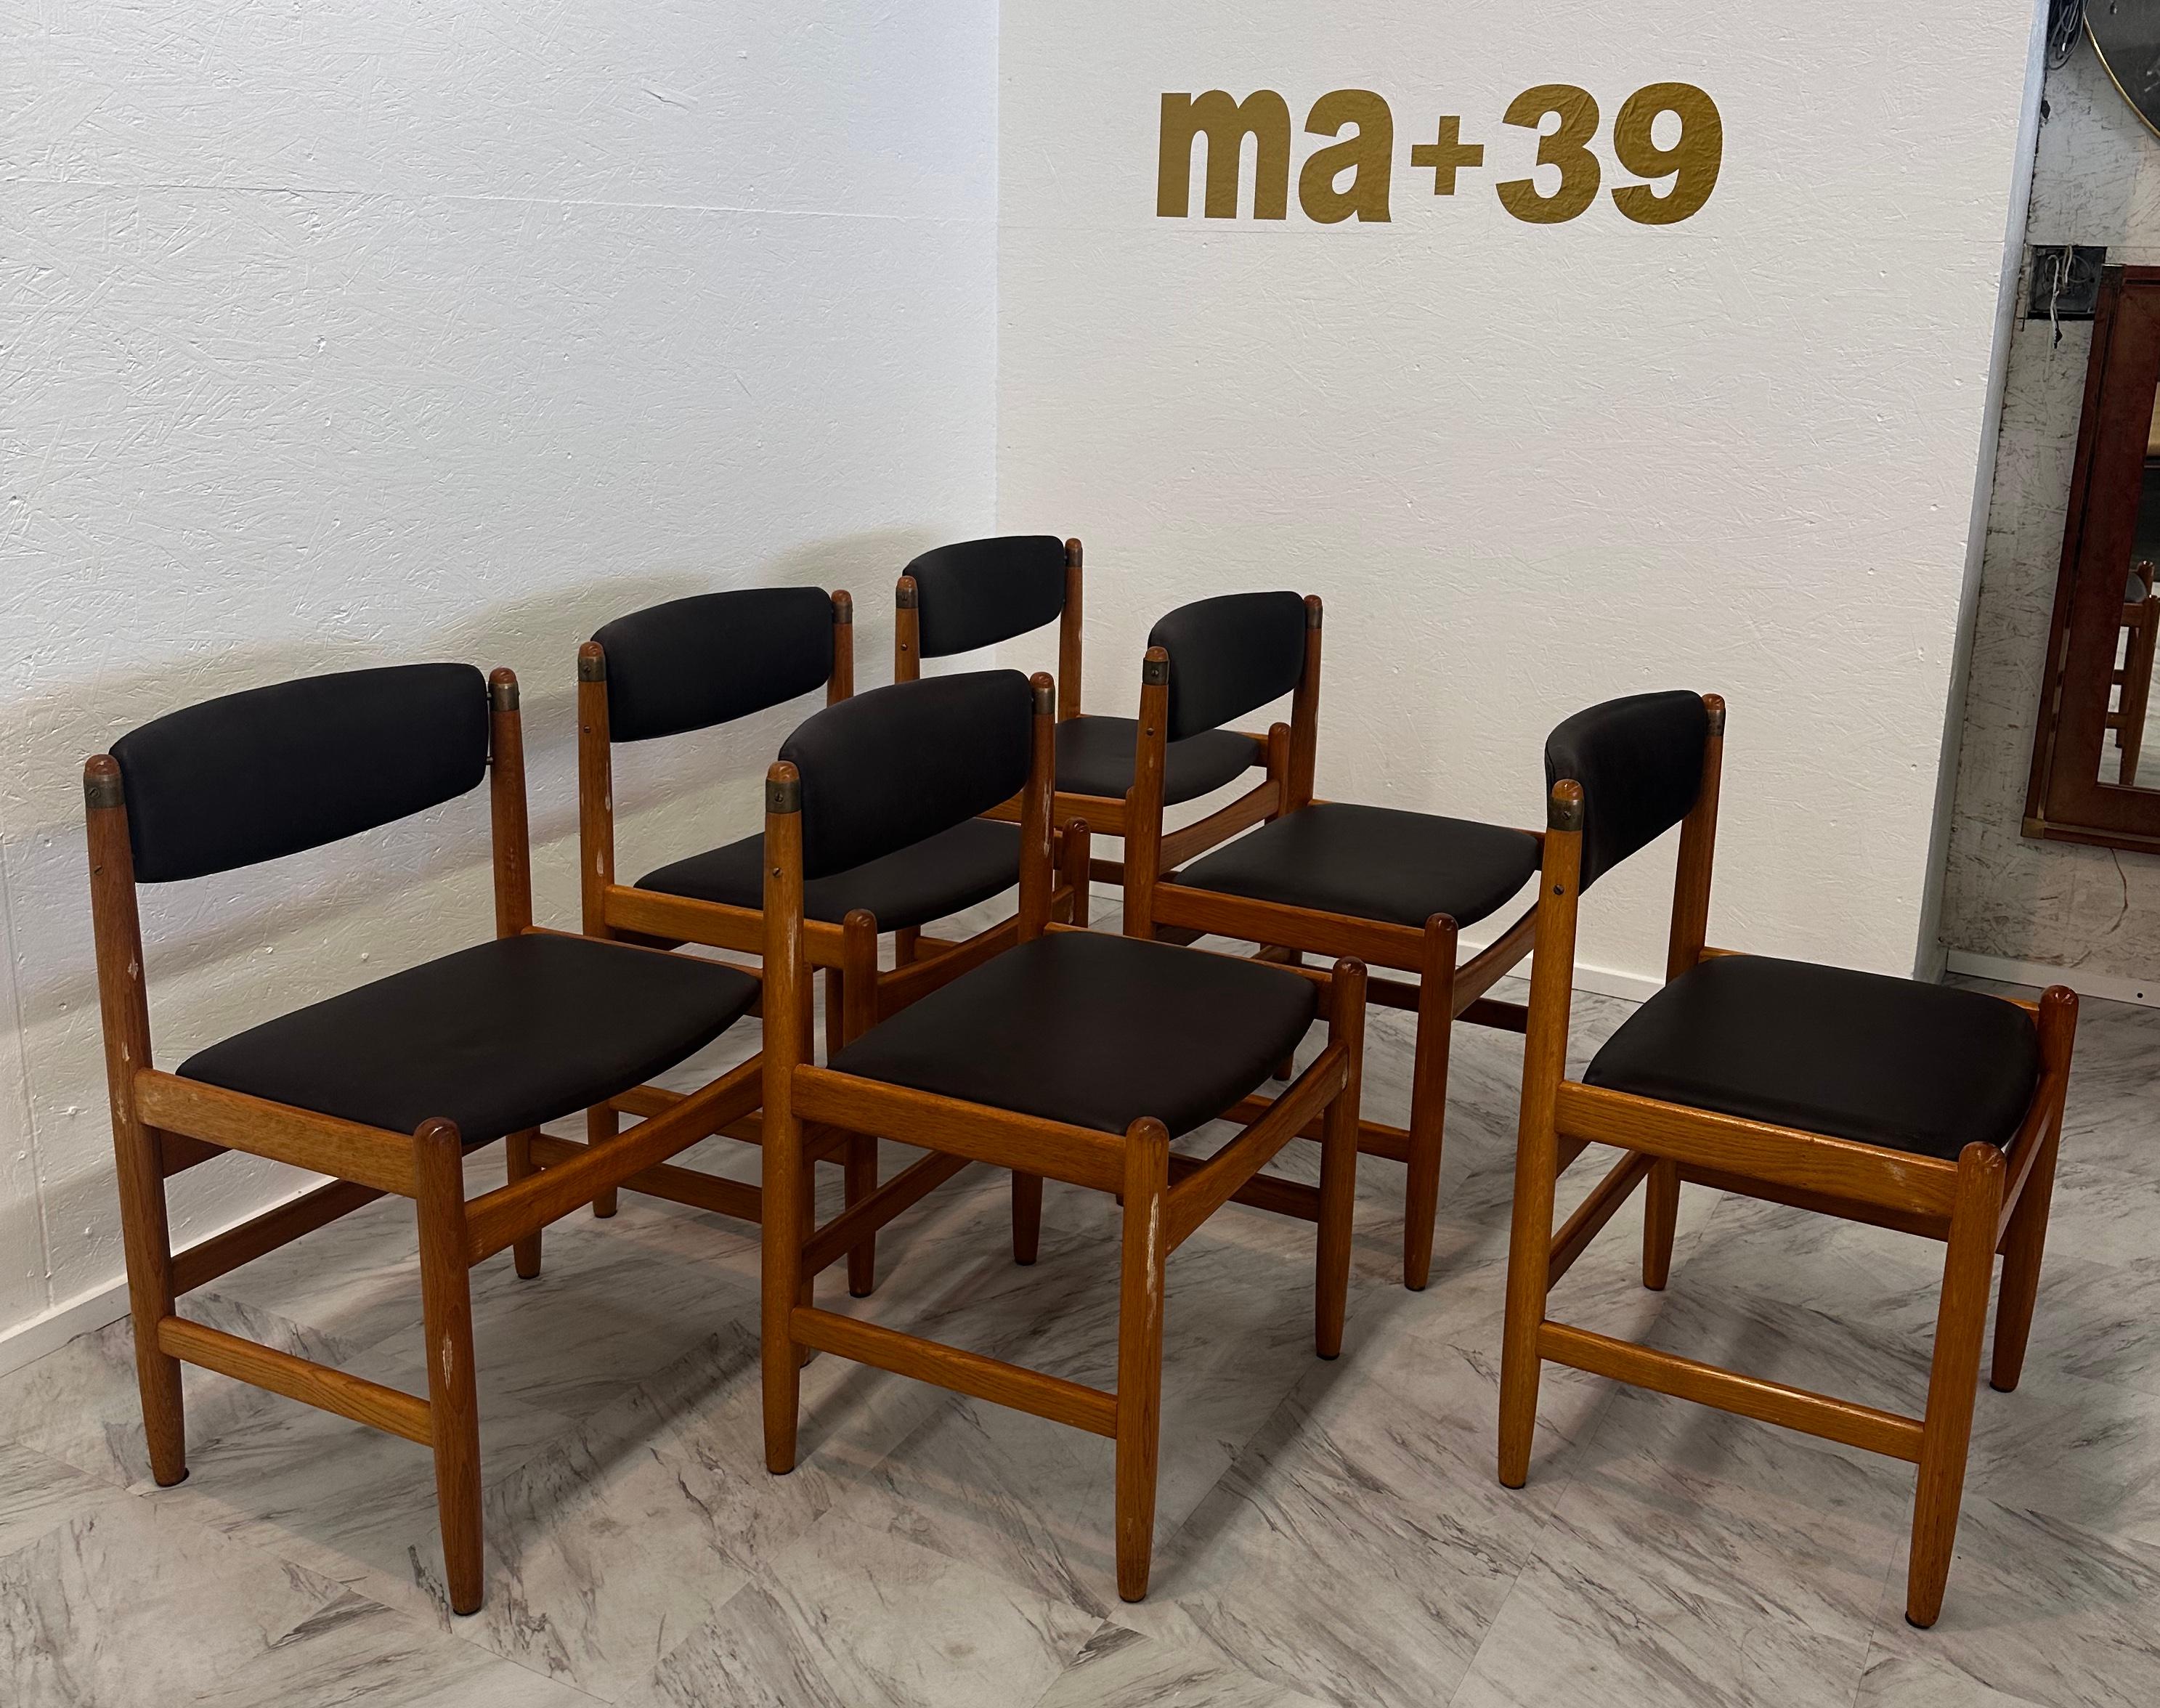 Mid-Century Modern Set of 6 Oak Dining Chairs by Børge Mogensen for Karl Andersson & Söner, 1950s For Sale